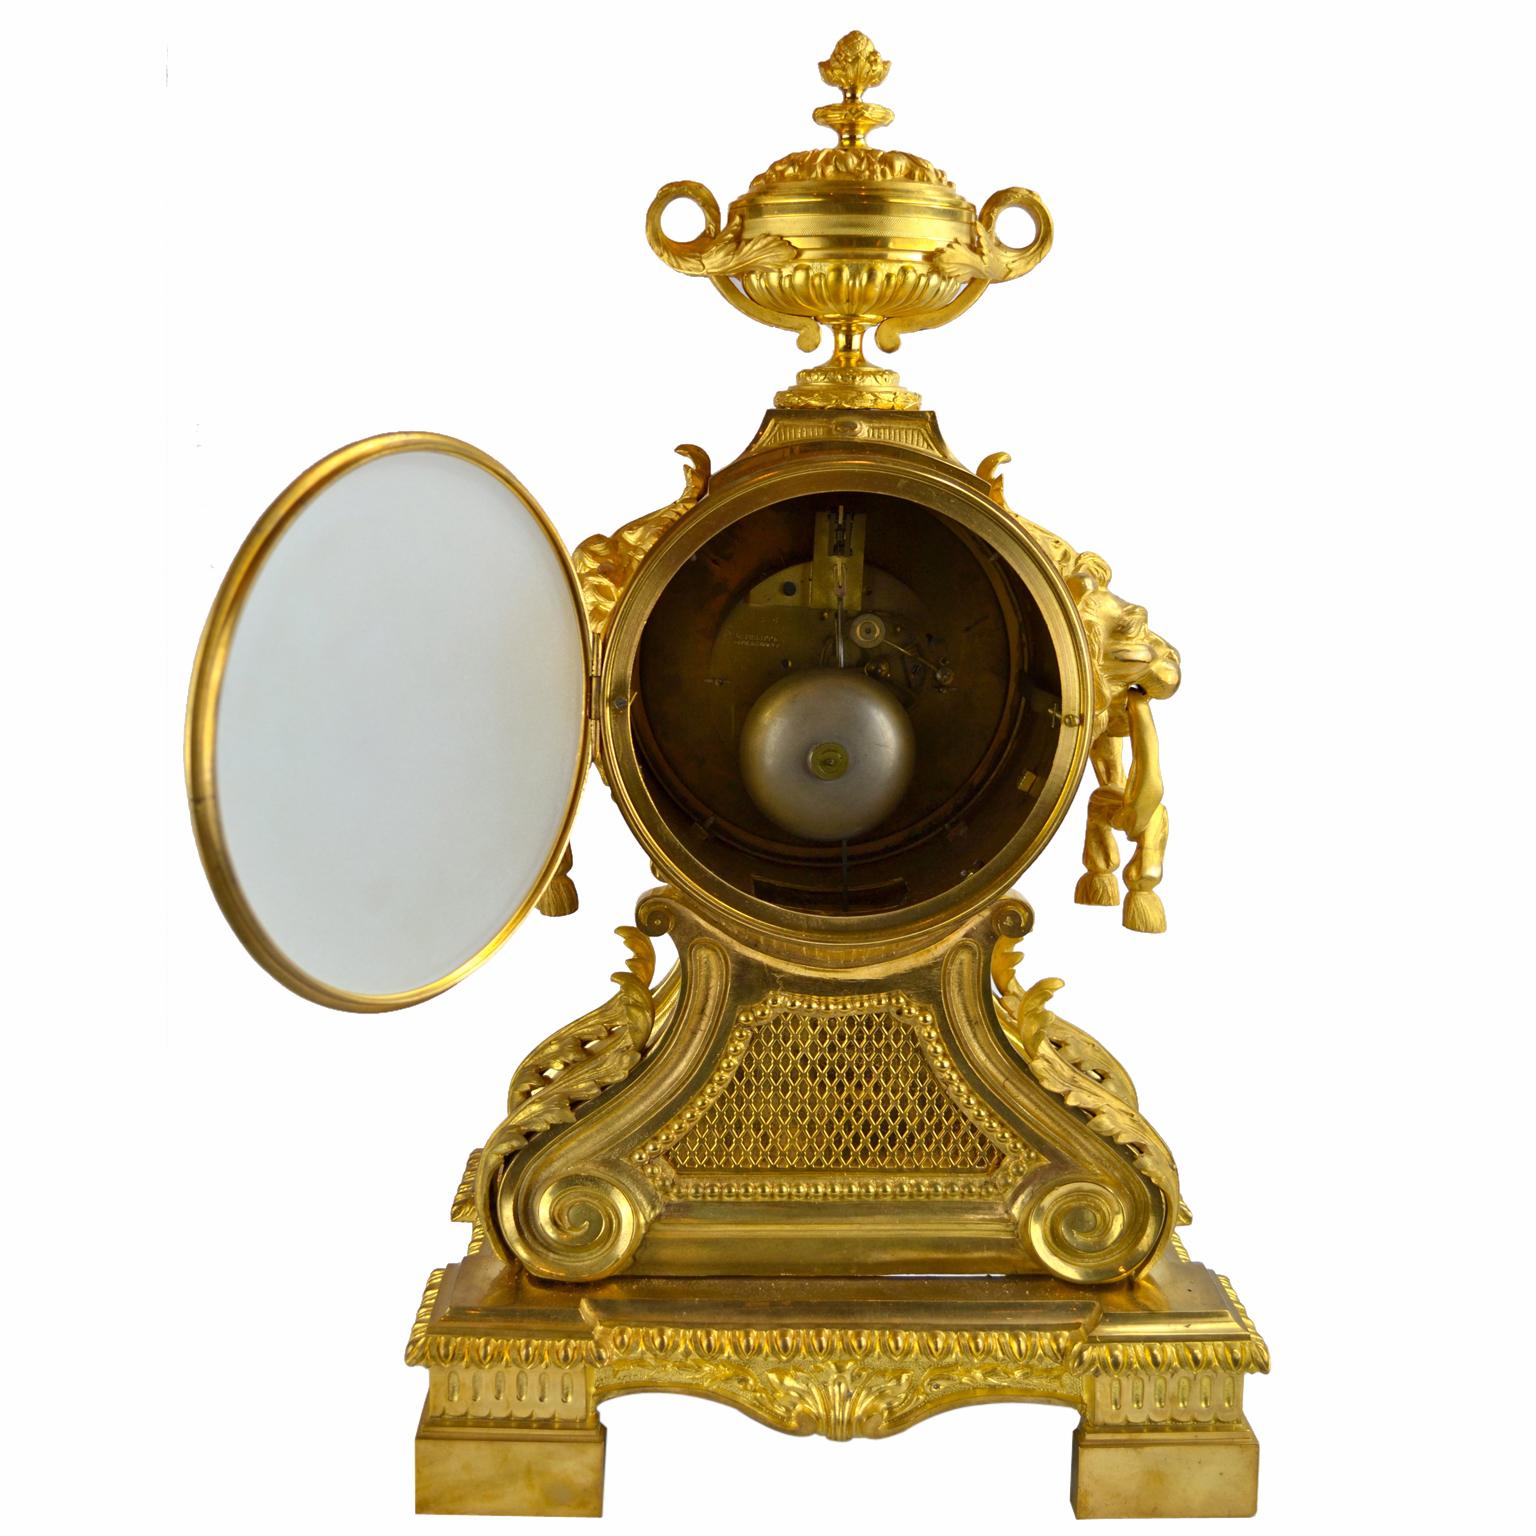 A gilt and chiseled bronze Louis XVI style mantle clock after a popular model of the late 18thC in France. The clock is topped with a large gilded lidded urn and has lion's muzzles holding loops on either side of the clock dial and plinth. The dial